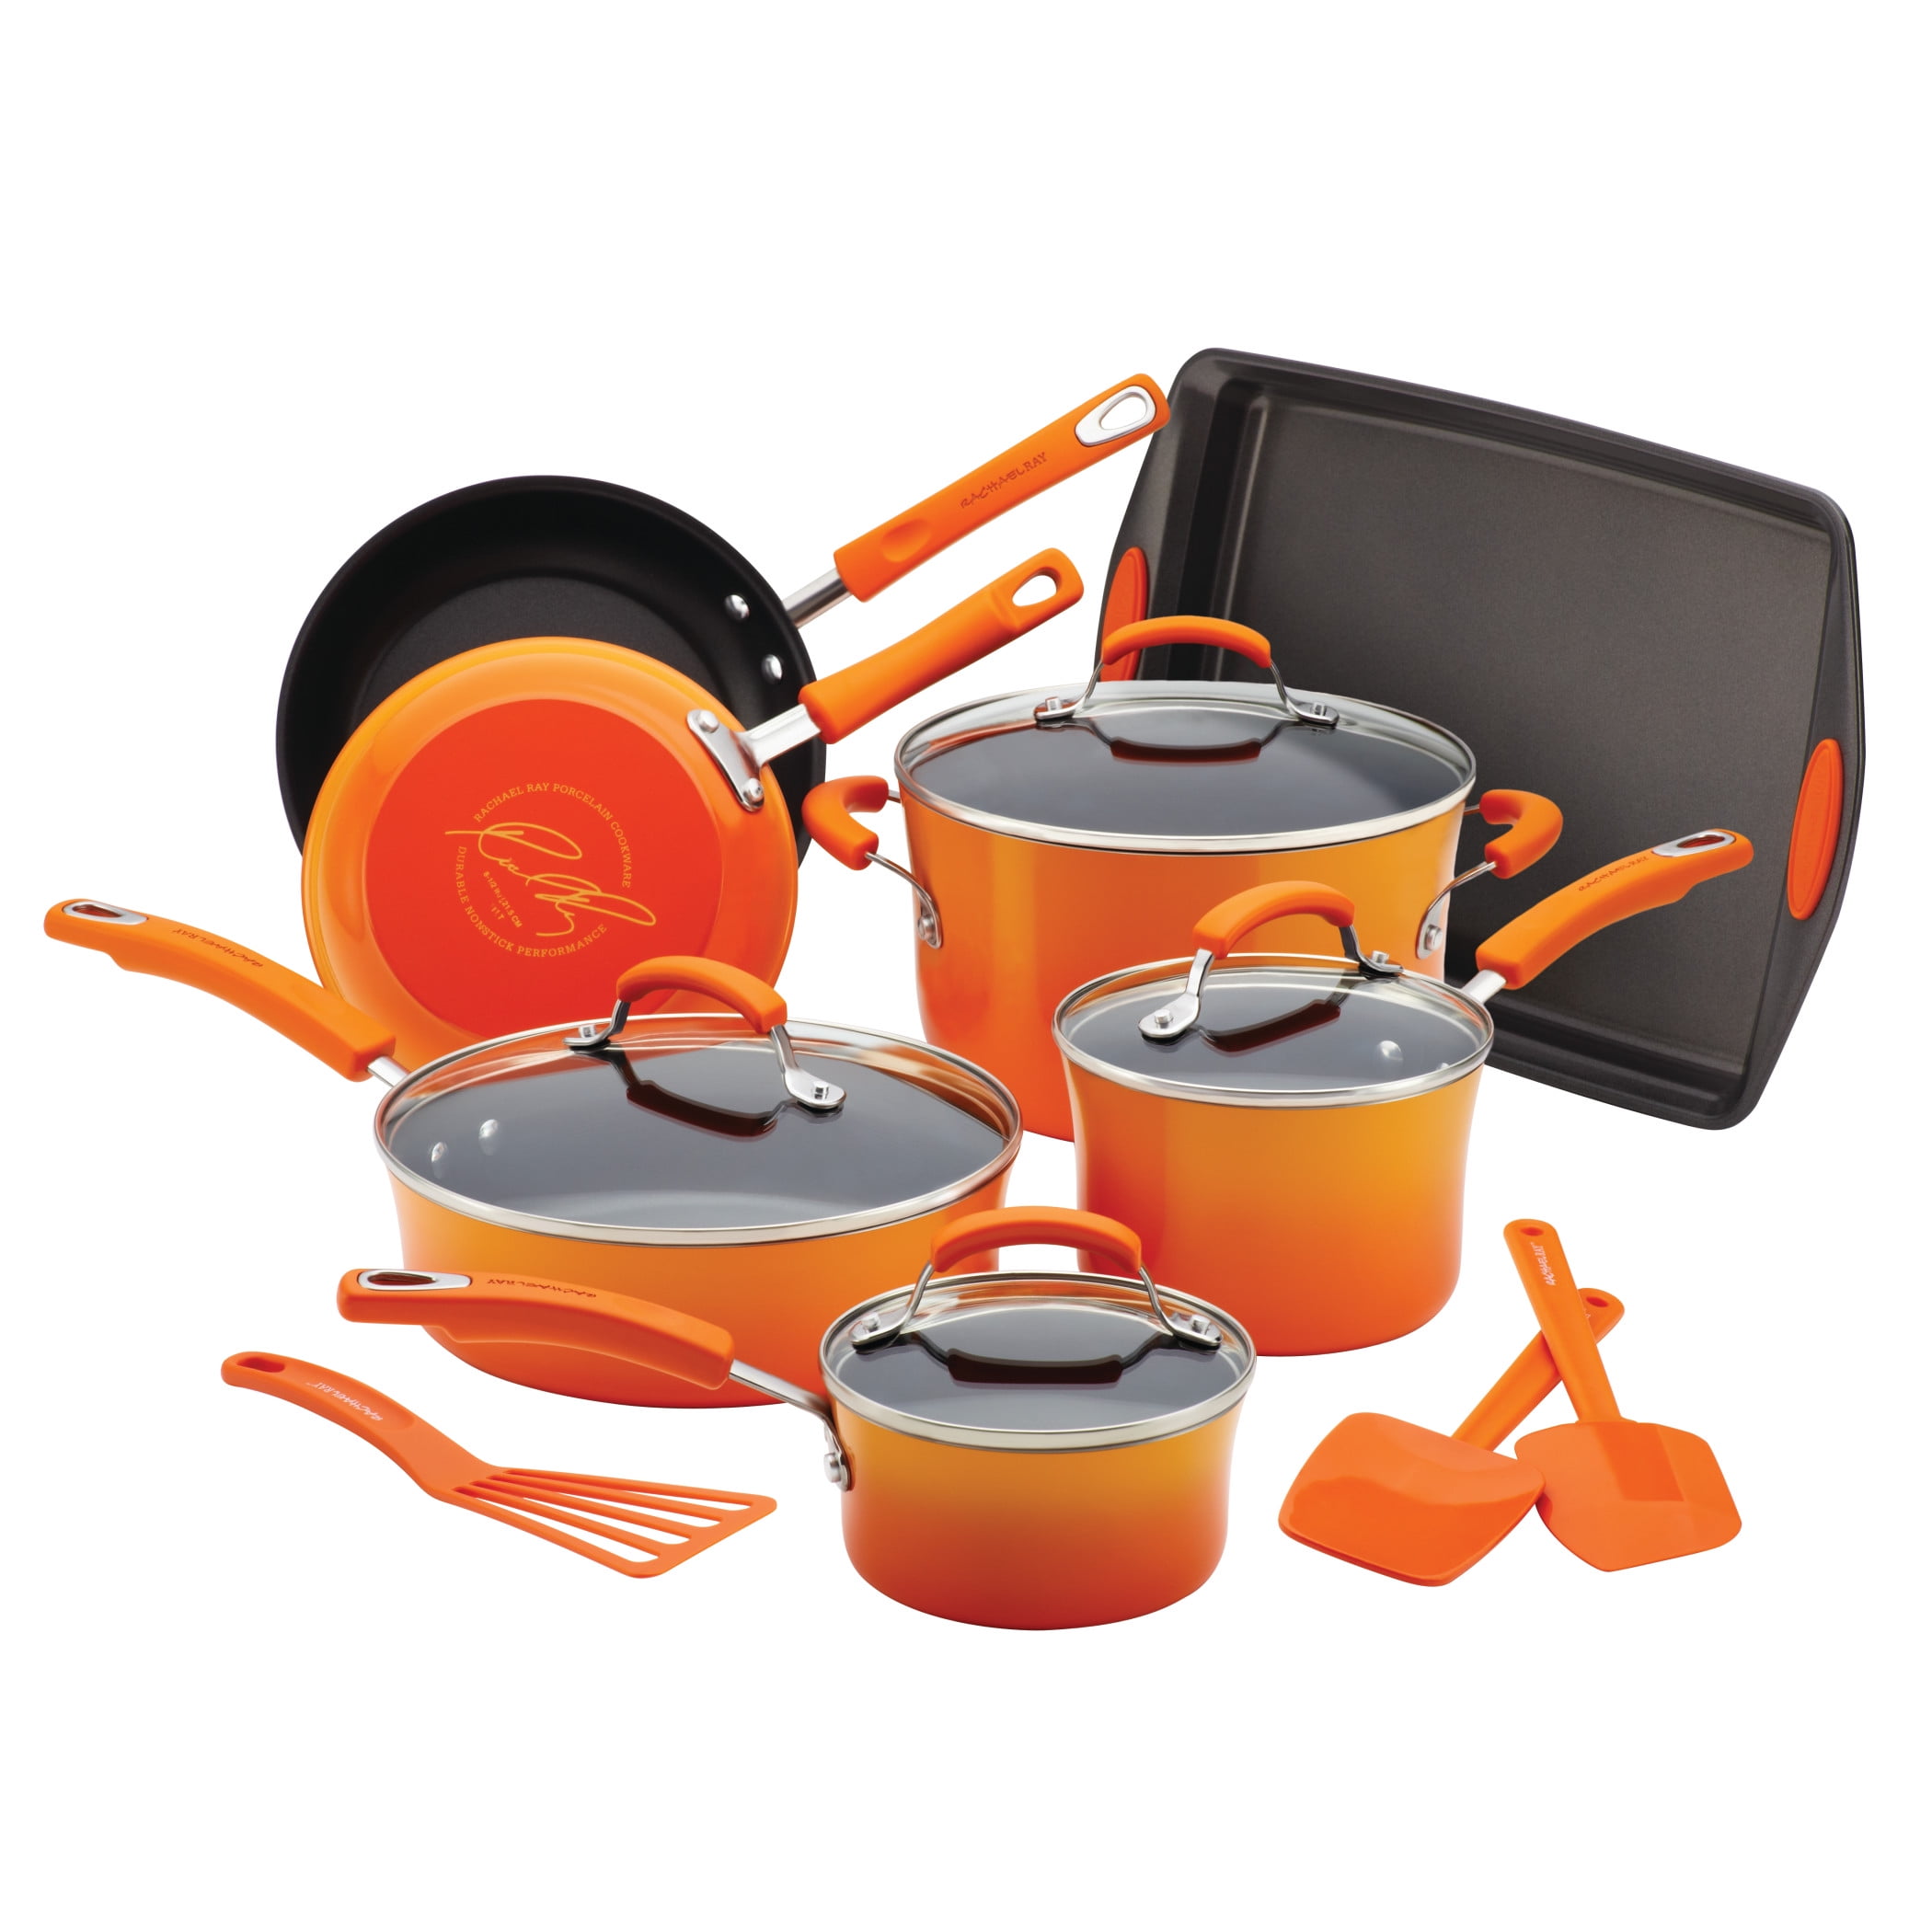 Rachael Ray 14-Piece Classic Bright's Nonstick Pots and Pans Set